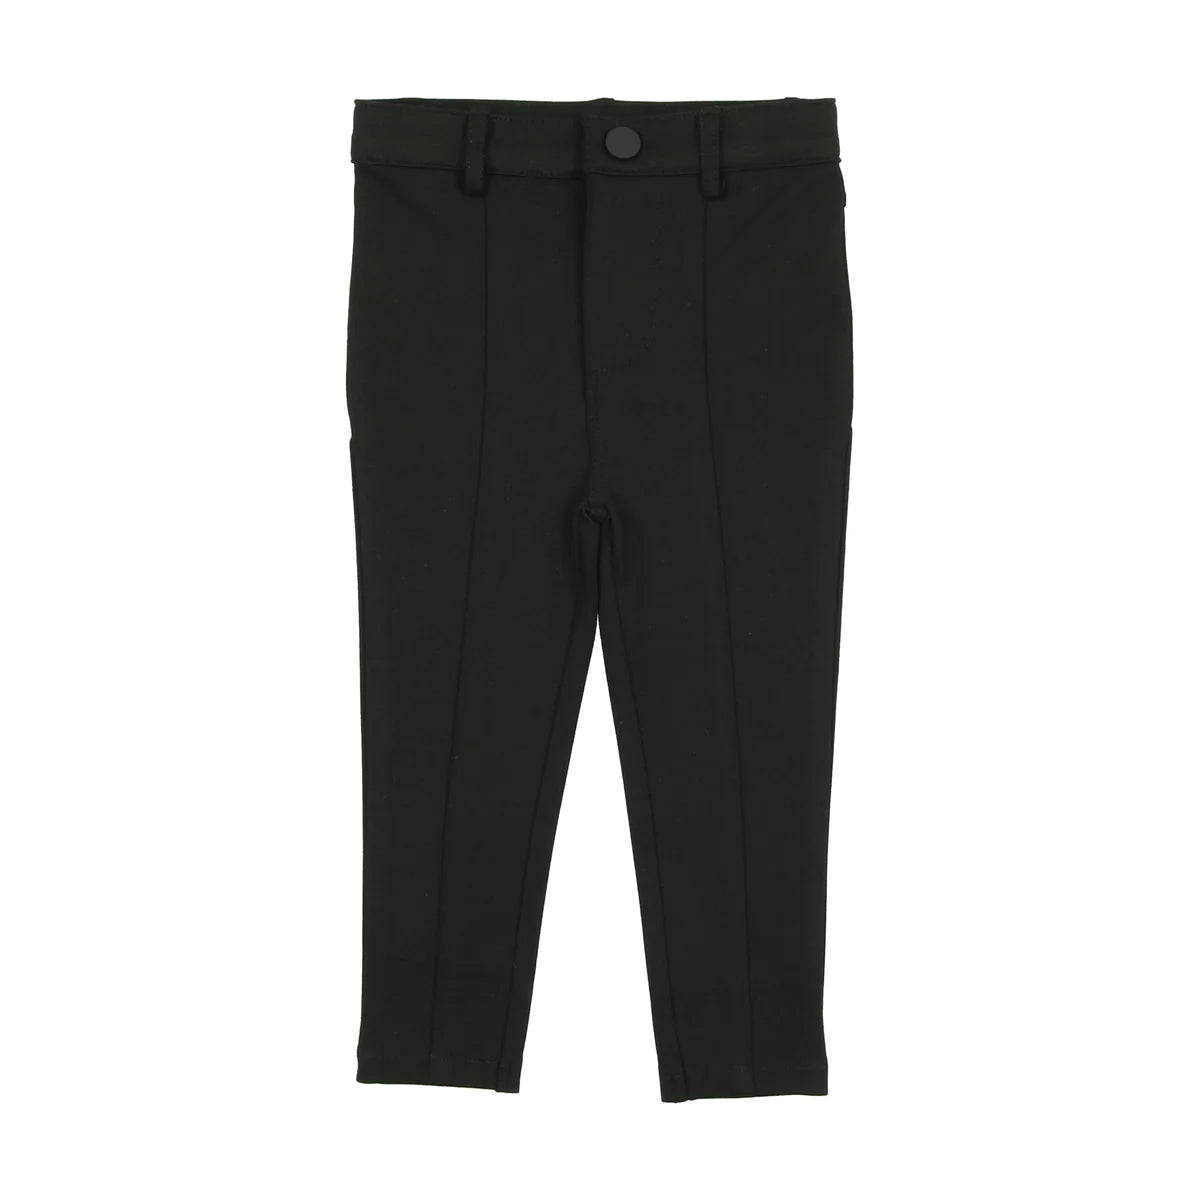 Black Knit Stretch Pants with Seam